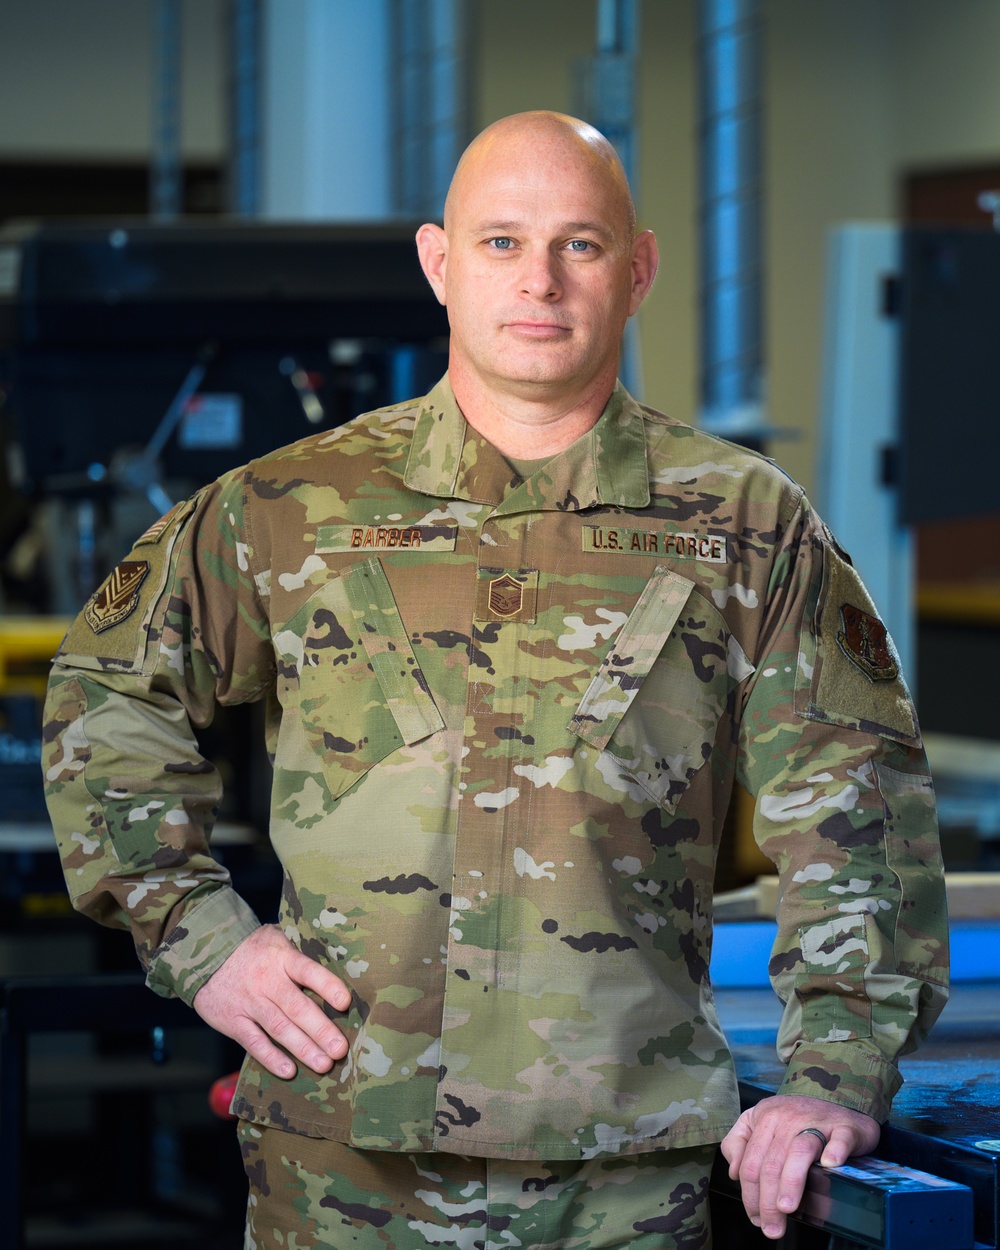 116th Civil Engineer Superintendent wins Chief Master Sgt. Larry R. Daniels award at NGB level